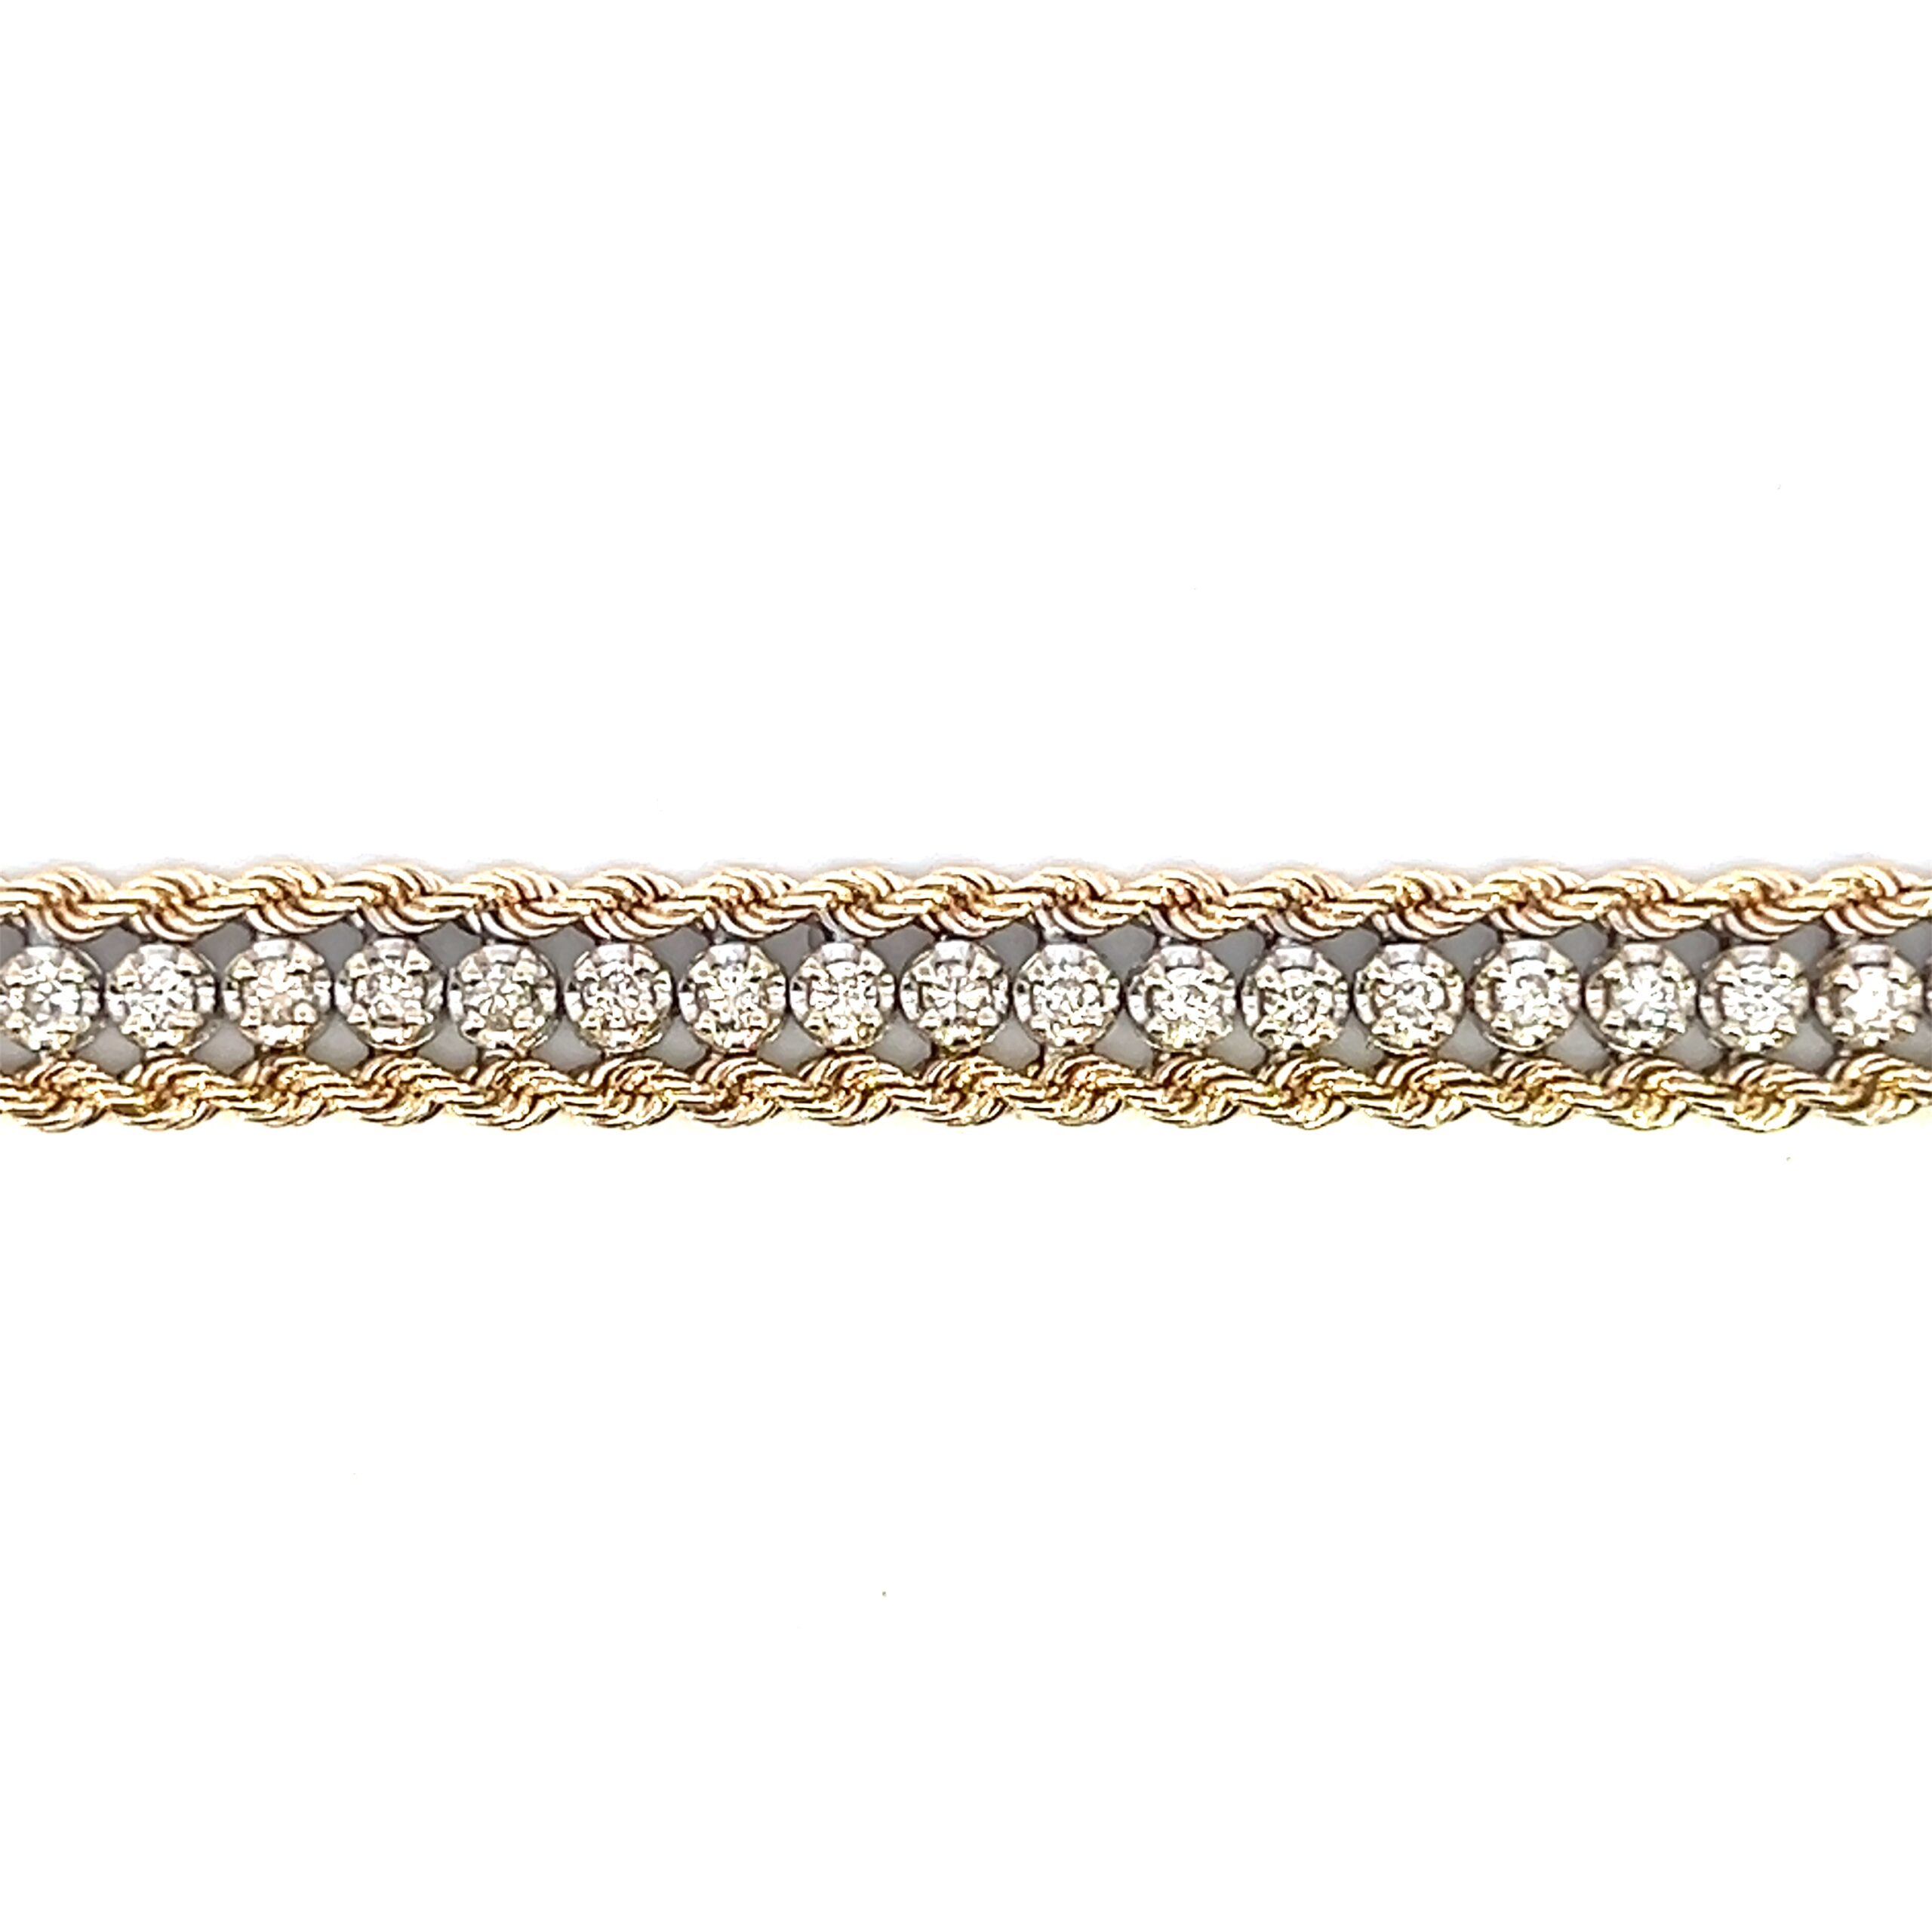 One estate 14 karat yellow gold diamond bracelet from the 1970s featuring 48 round brilliant-cut diamonds weighing 1.50 carat total weight in white gold prong settings with a yellow gold rope chain on either side of the diamonds. The bracelet measures 7.25" long and is secured with a box clasp and safety catch.